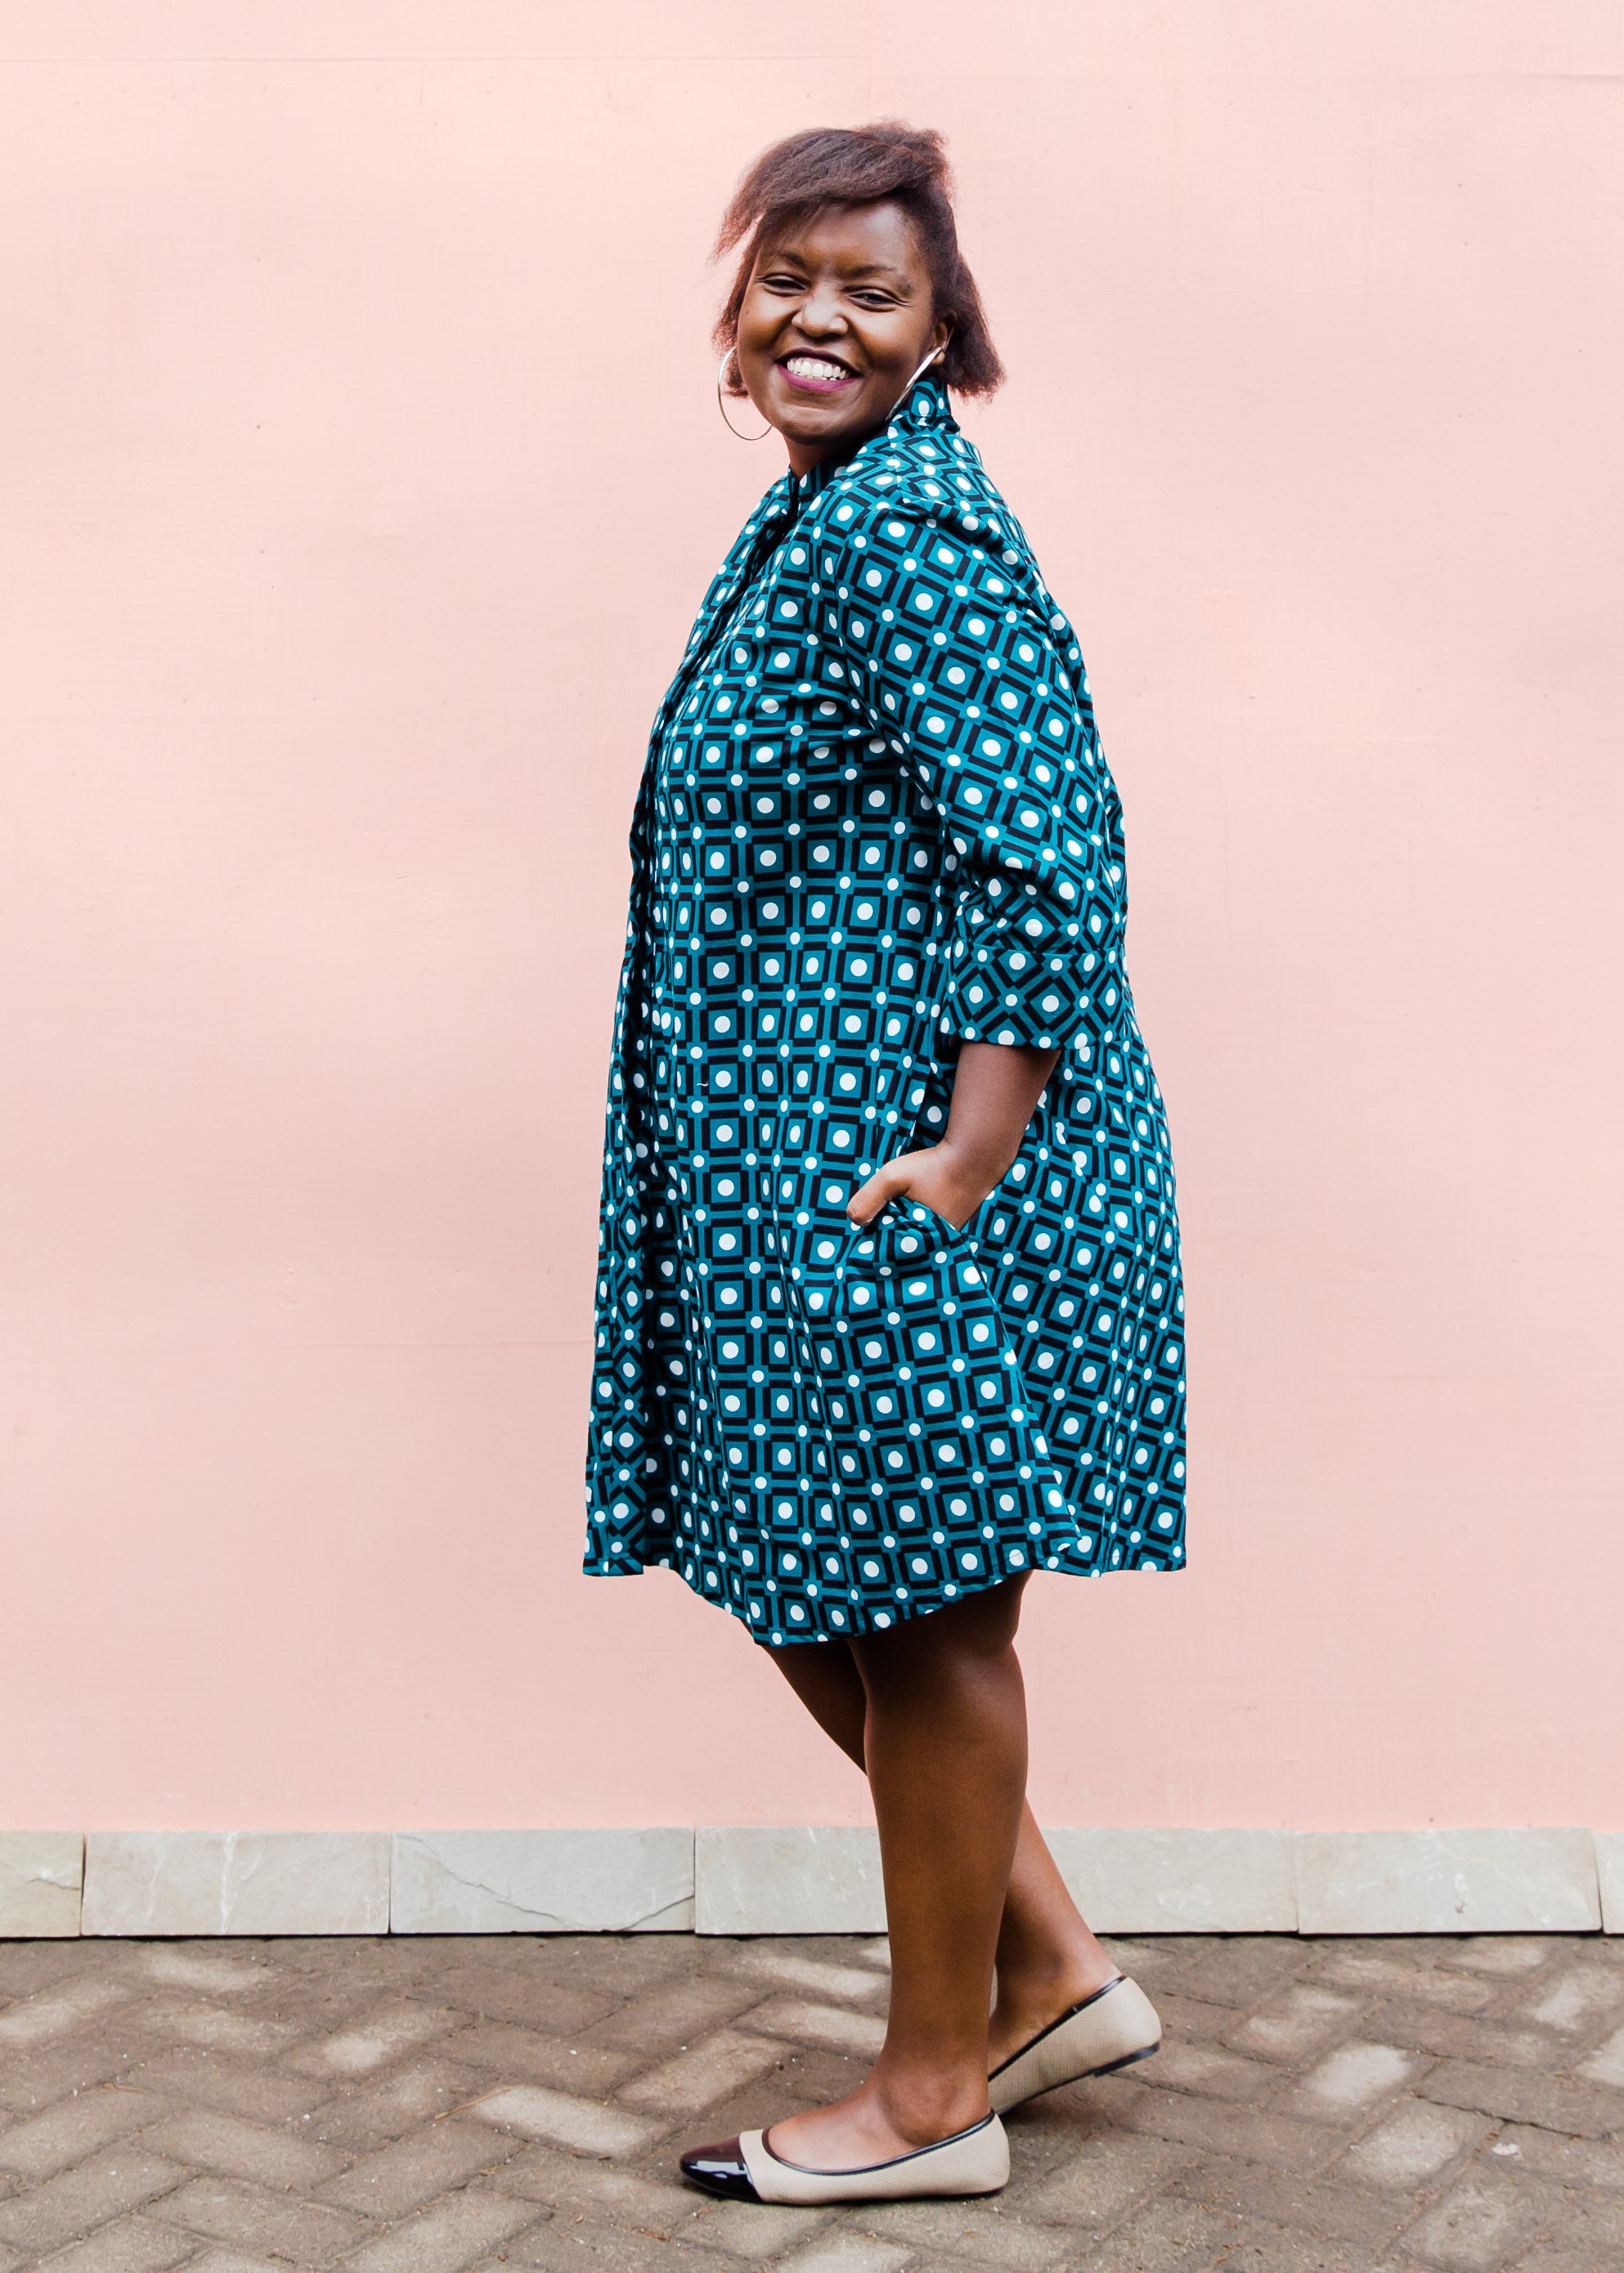 Teal dress with white dots